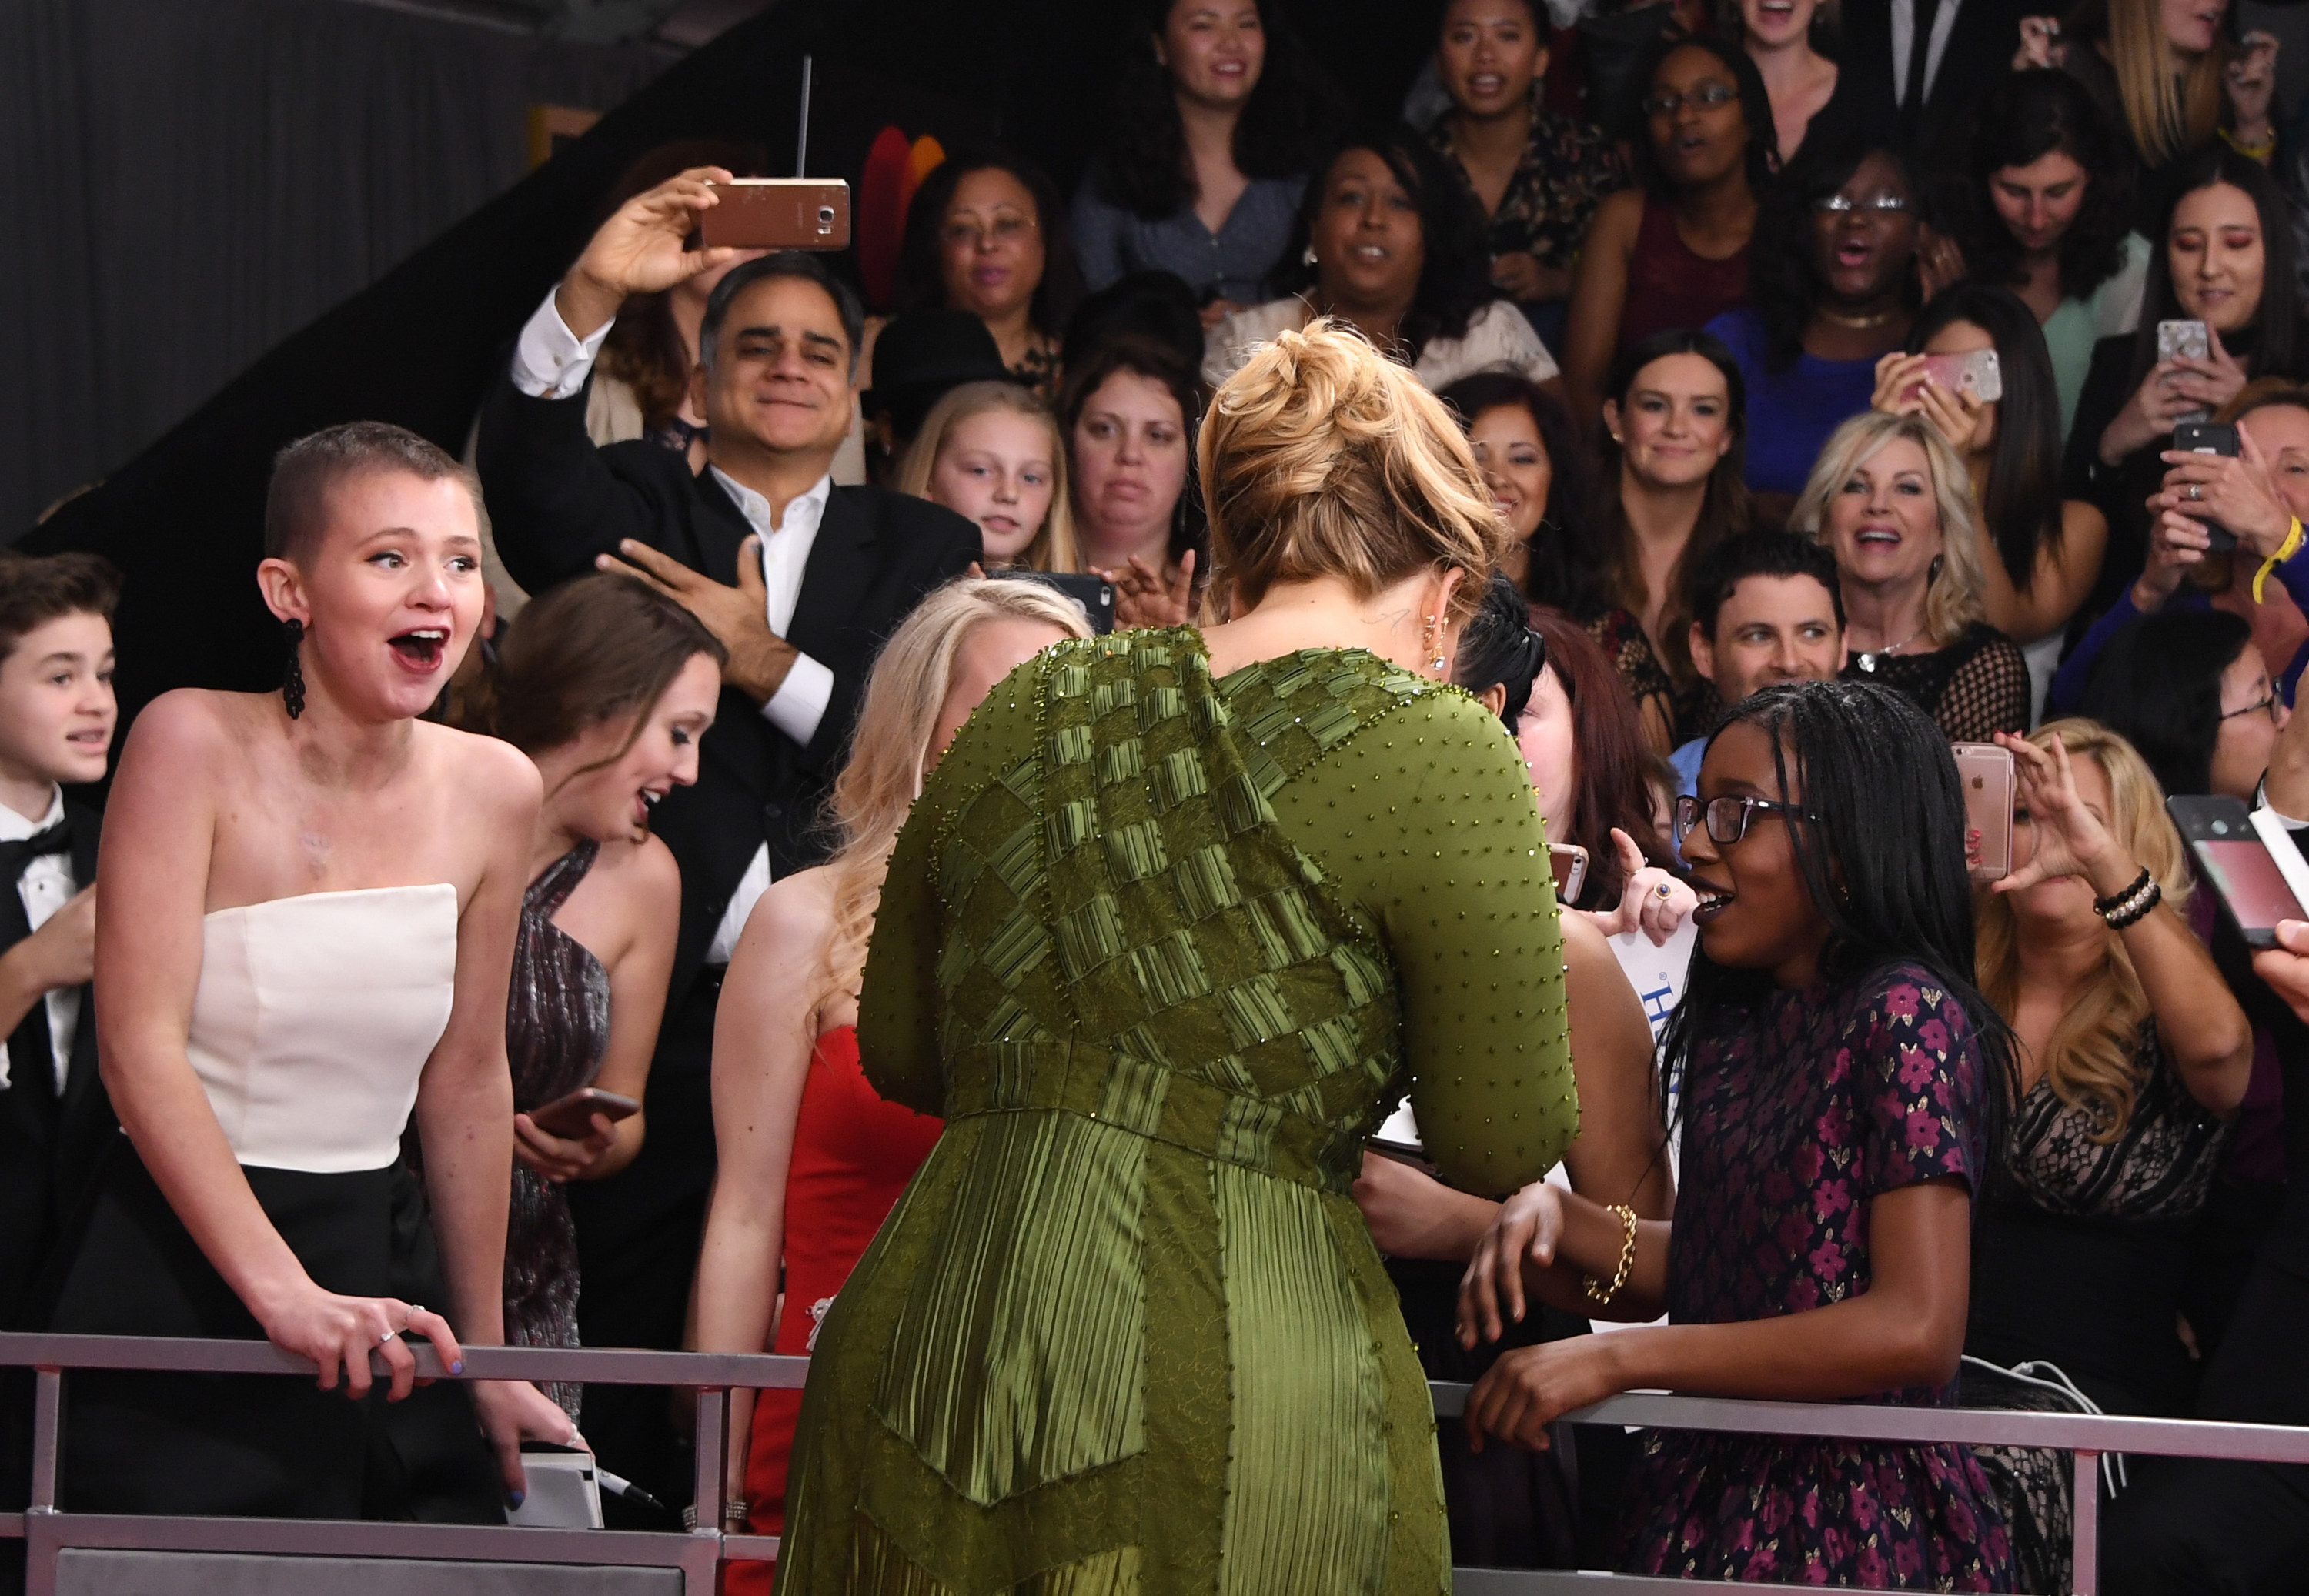 Adele greets a group of fans and signs autographs